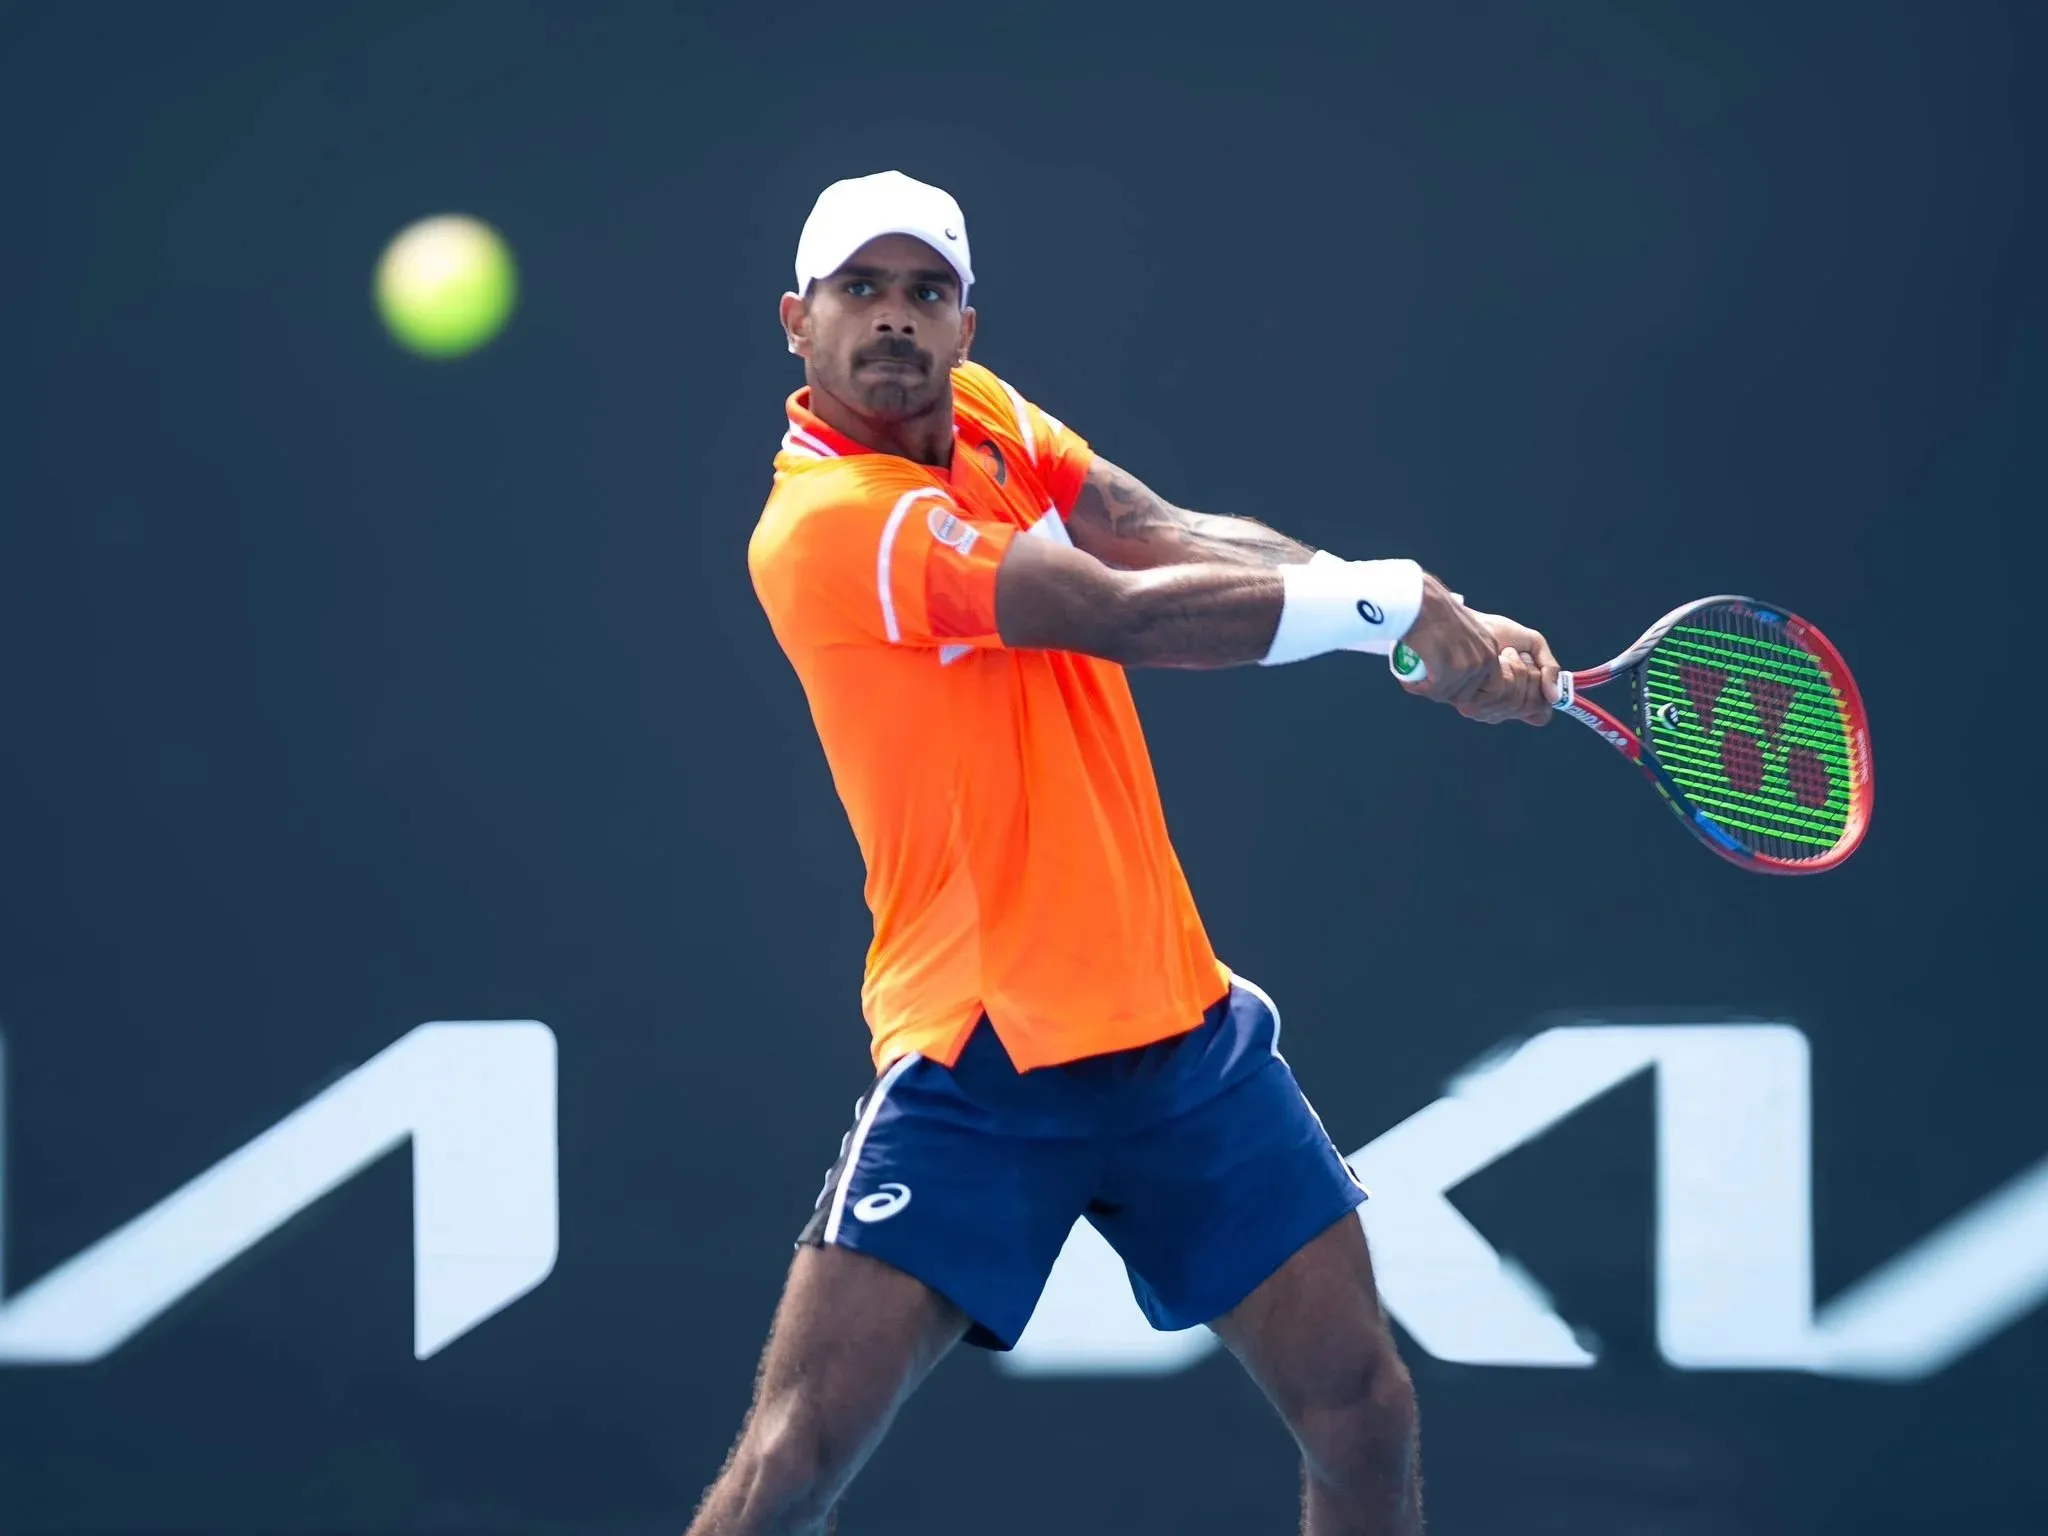 Sumit Nagal knocked out world no. 27 Alexander Bublik in the first round of the Australian Open. Image- Free Press Journal  